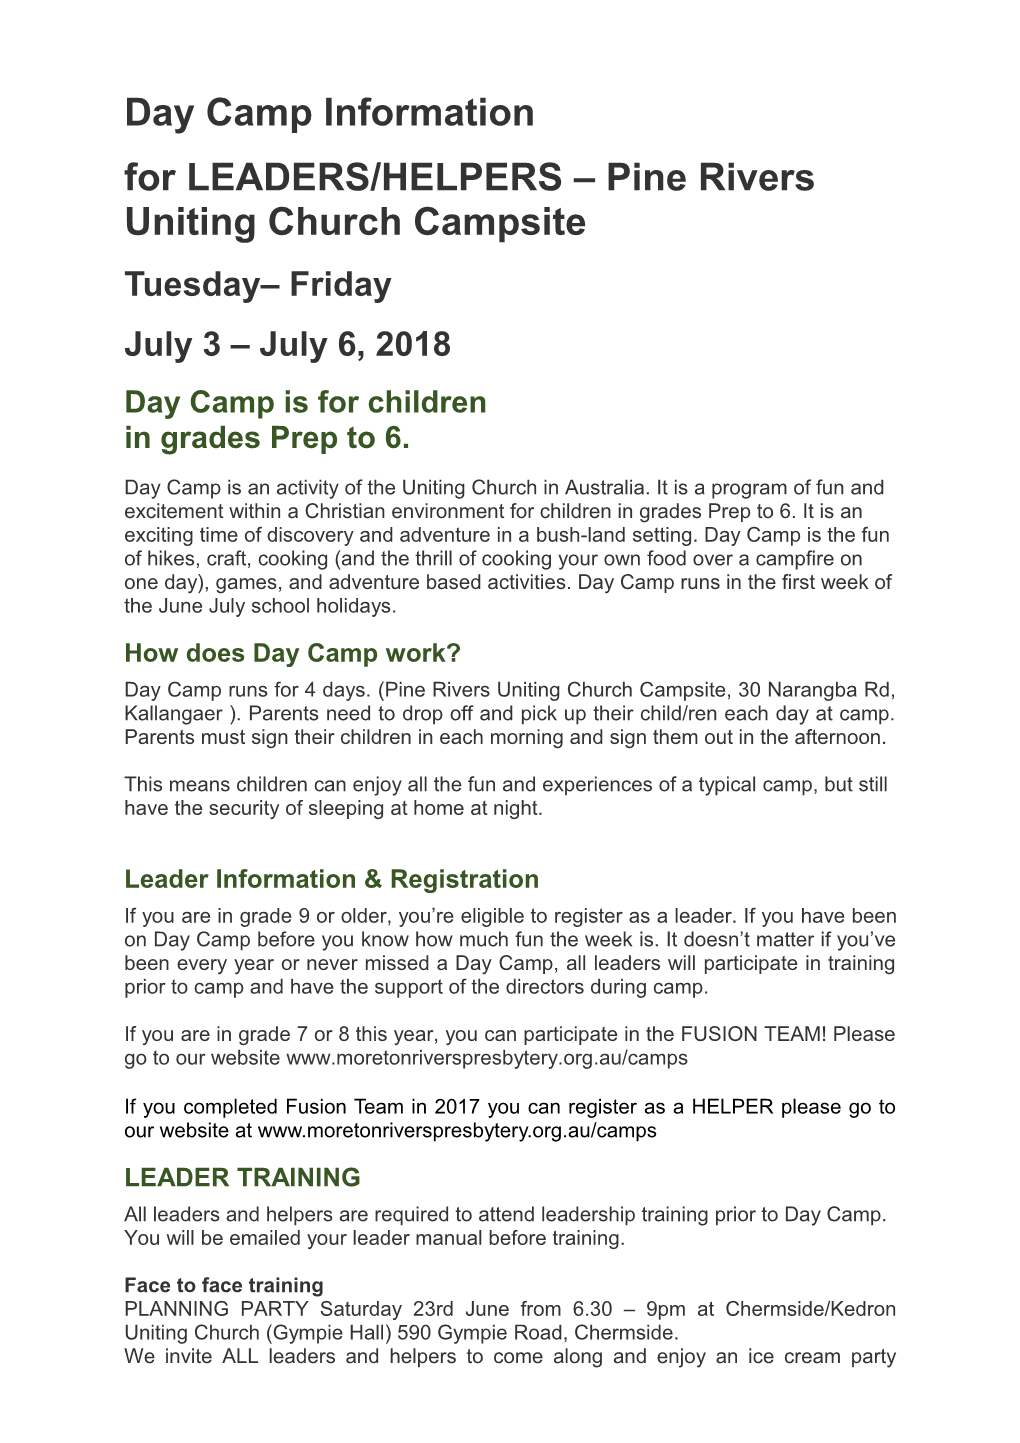 For LEADERS/HELPERS Pine Rivers Uniting Church Campsite